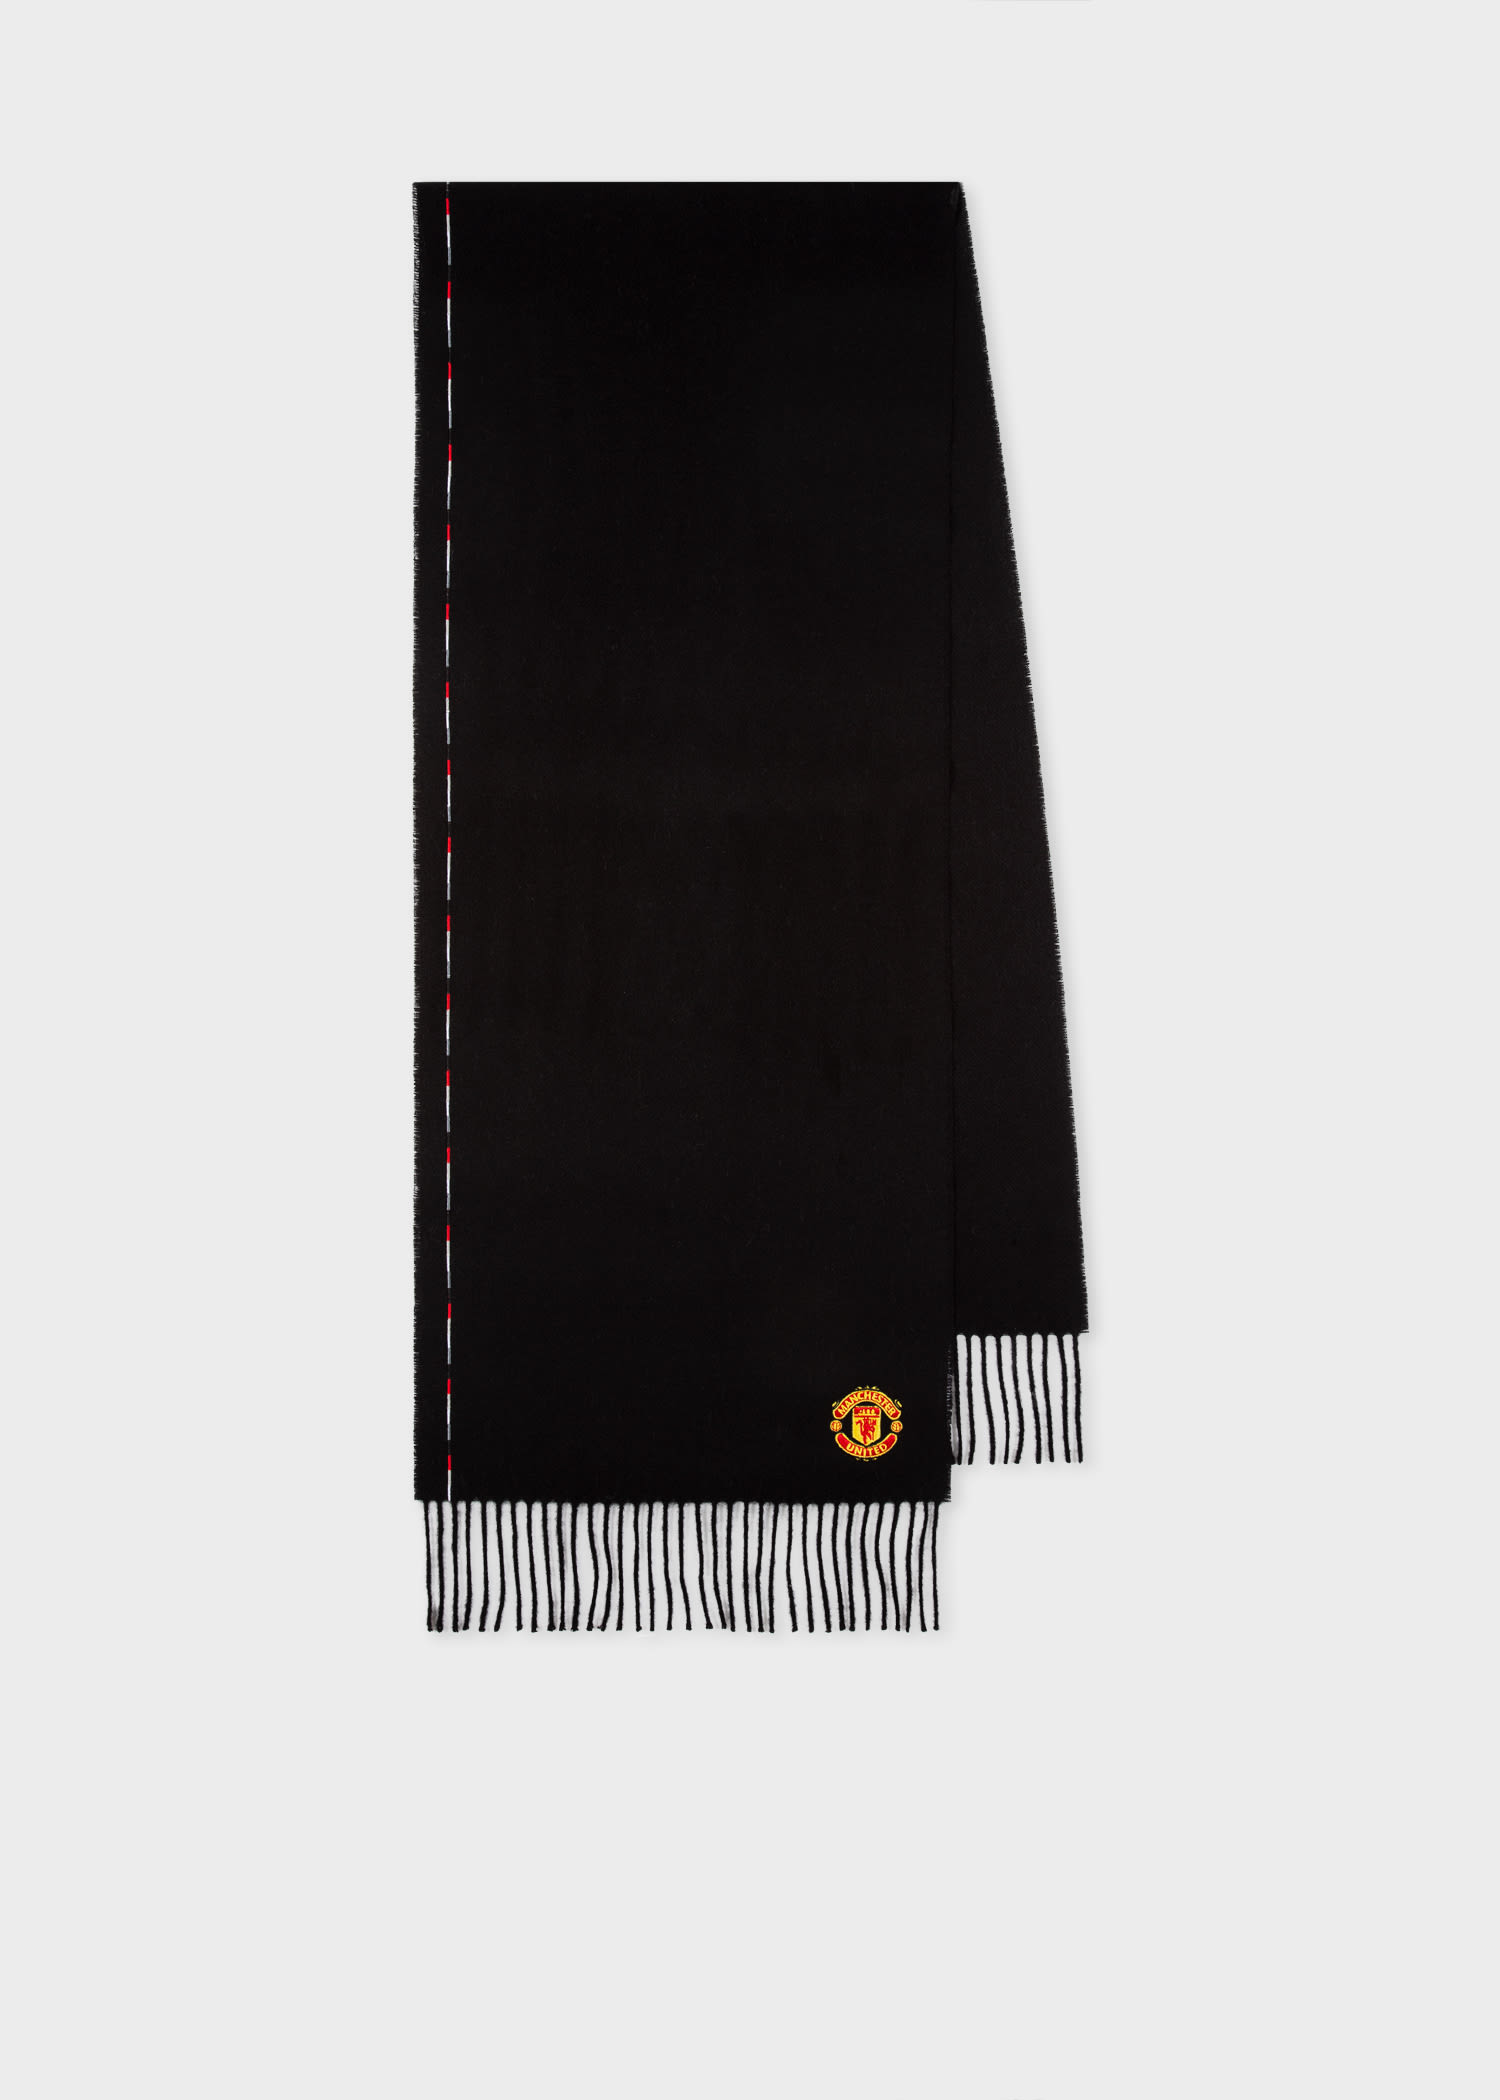 Paul Smith & Manchester United - Black Wool Scarf